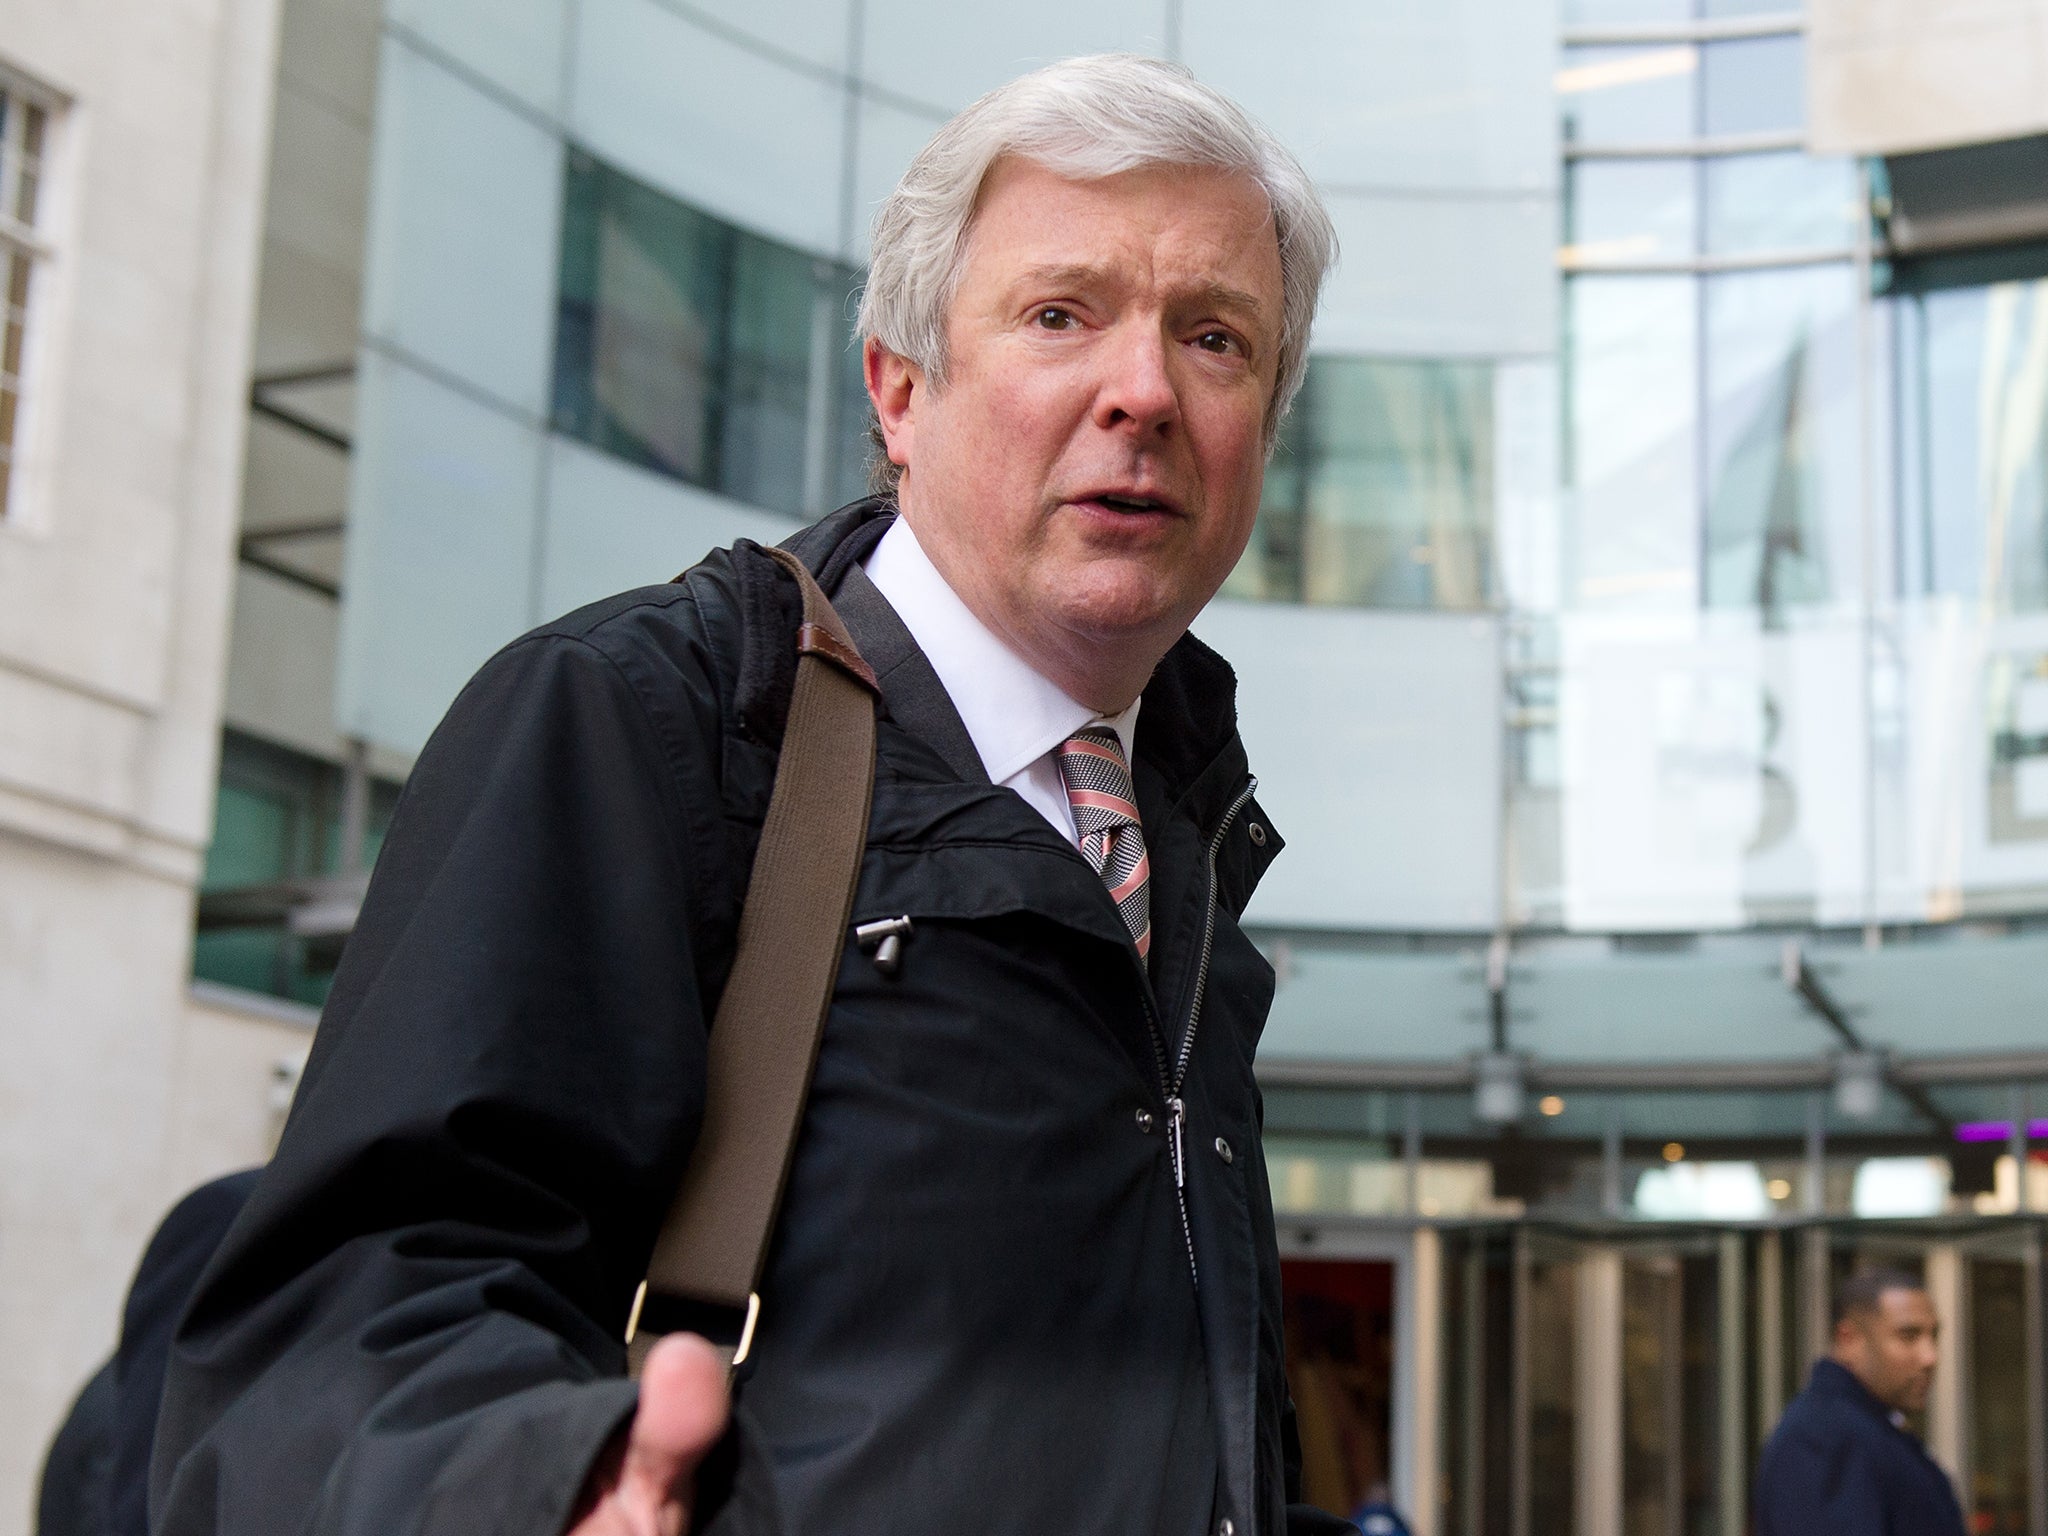 Tony Hall, the BBC Director-General, will be questioned by MPs on Wednesday